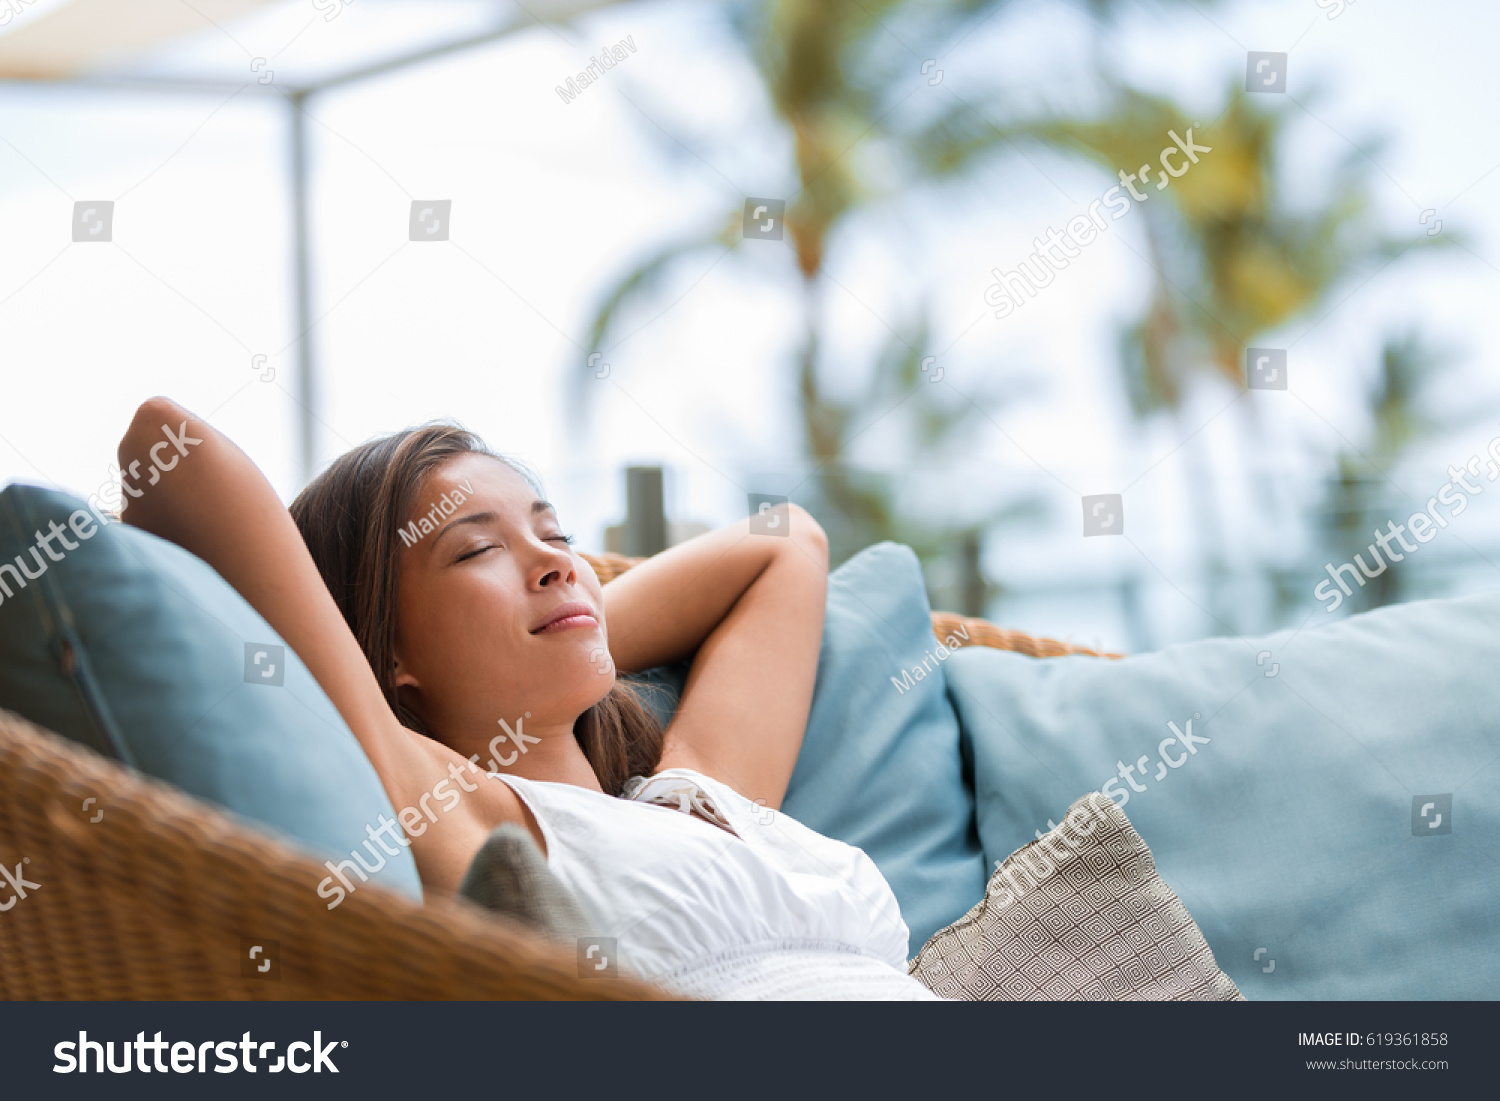 Home lifestyle woman relaxing sleeping on sofa on outdoor patio living room. Happy lady lying down on comfortable pillows taking a nap for wellness and health. Tropical vacation. #619361858